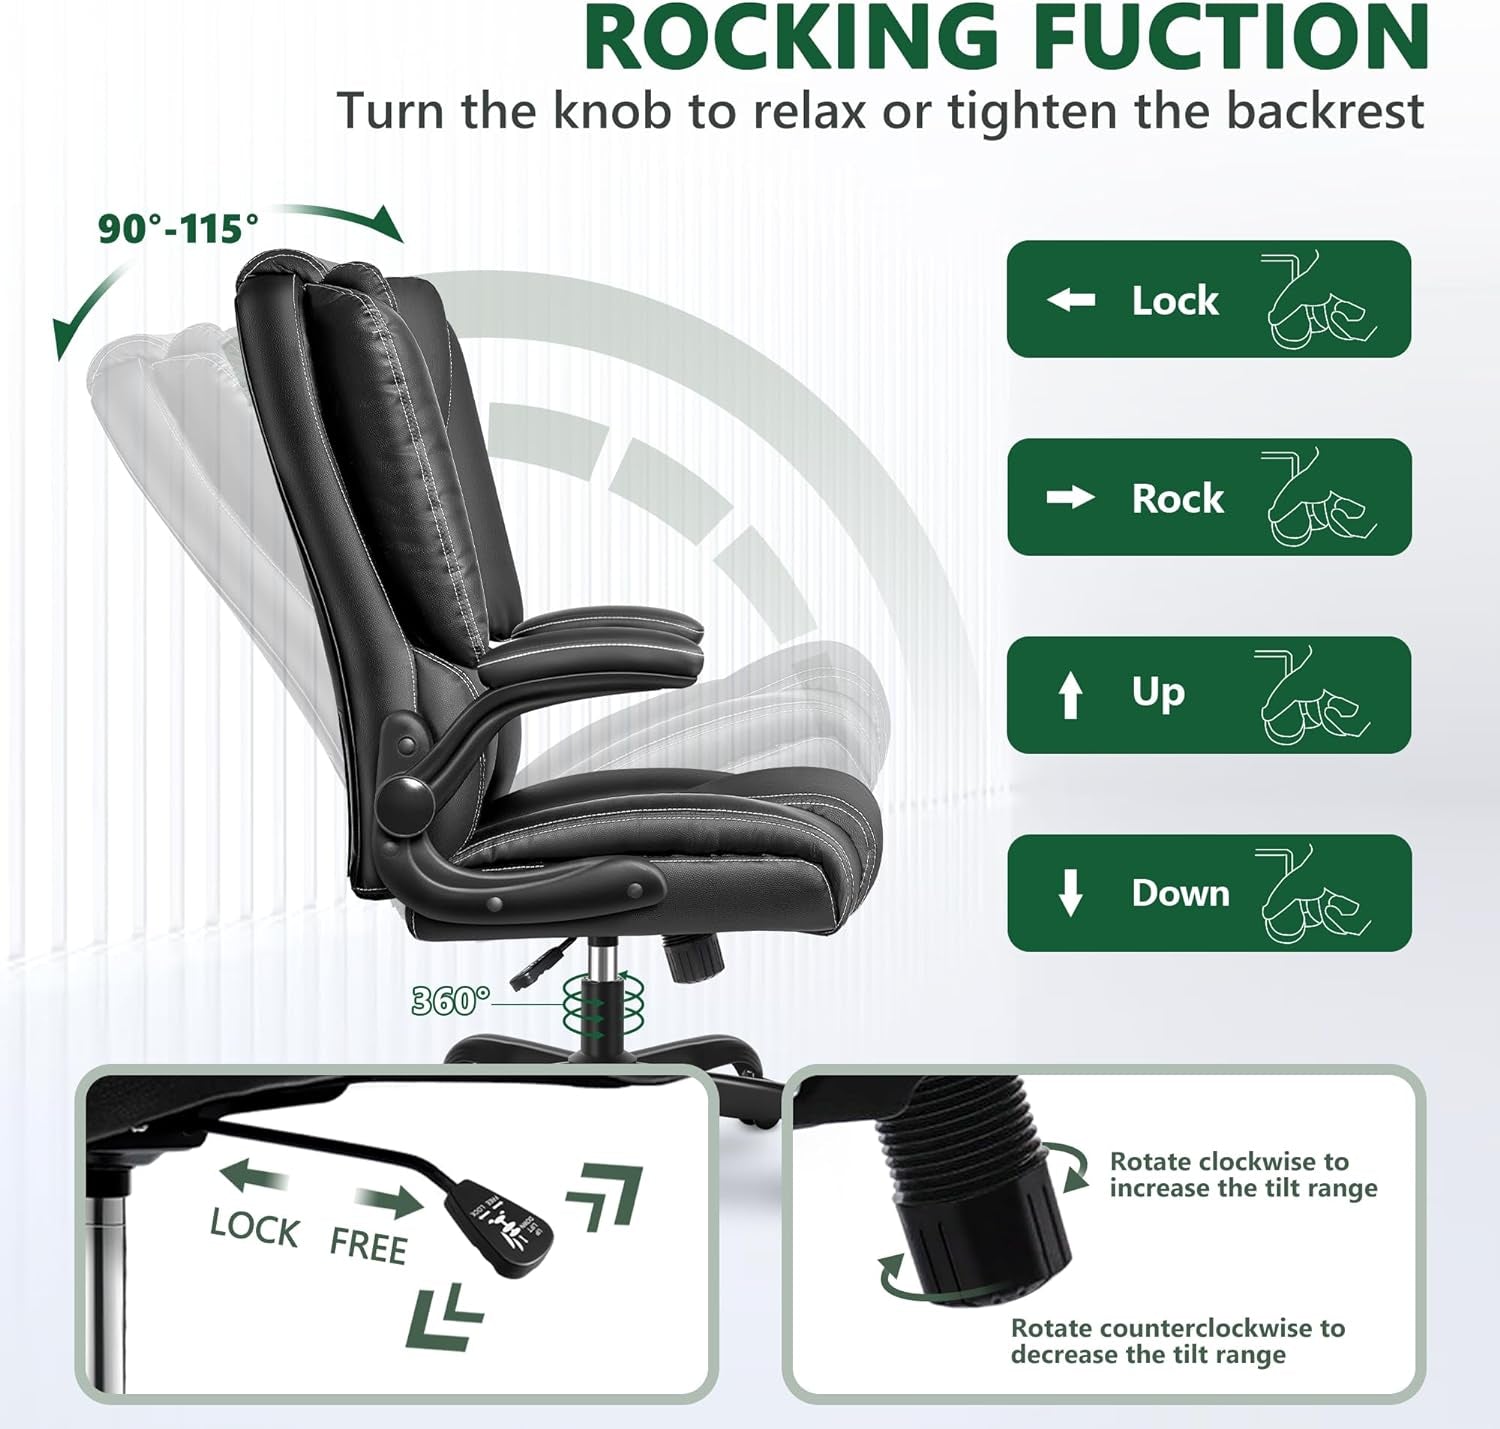 Office Chair,Executive Leather Chair Home Office Desk Chairs Ergonomic High Back with Lumbar Suppor Computer Chair Adjustable Flip-Up Armrest Swivel Rolling Chair with Rocking Function(Black